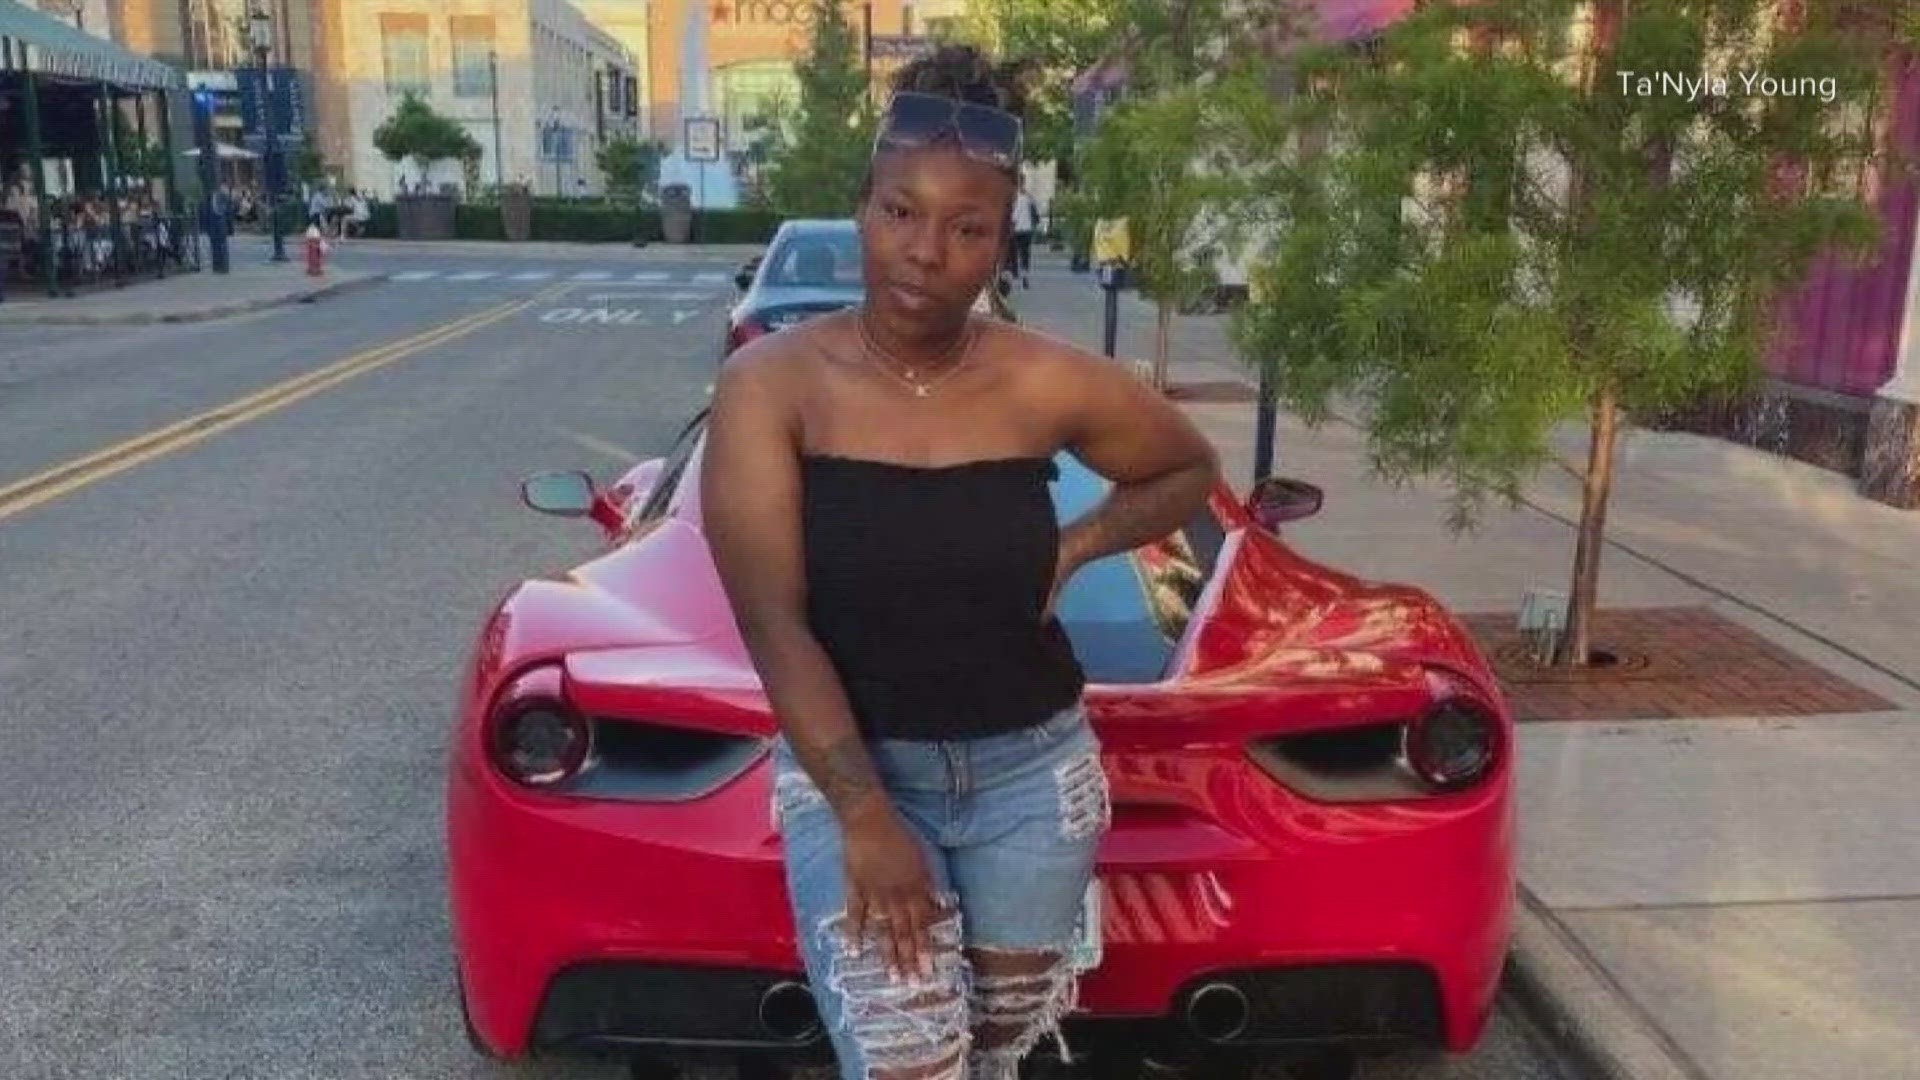 Ta'Kiya Young, 21, died in Blendon Township after being shot in the parking lot of a Kroger grocery store.